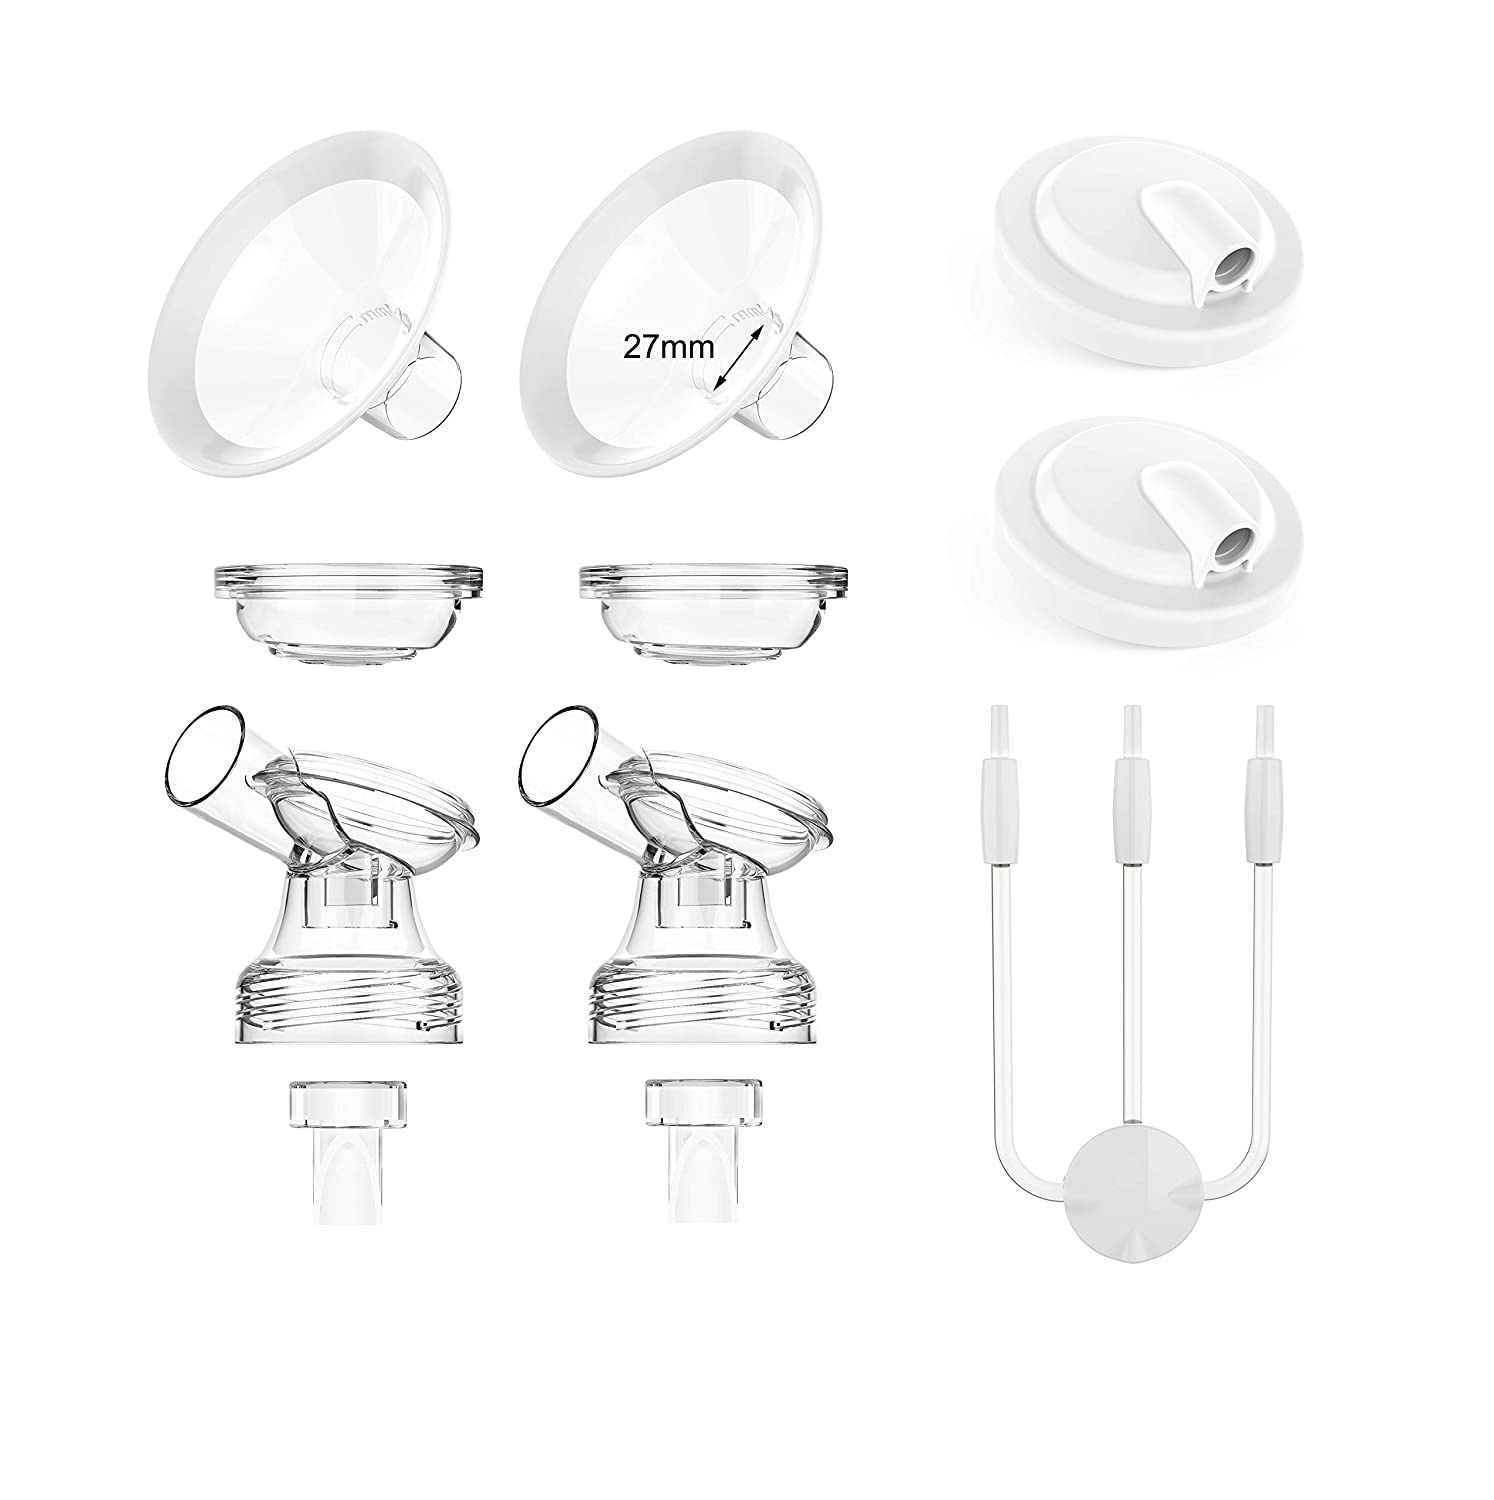 The 27mm parts for bellababy electric breast pump